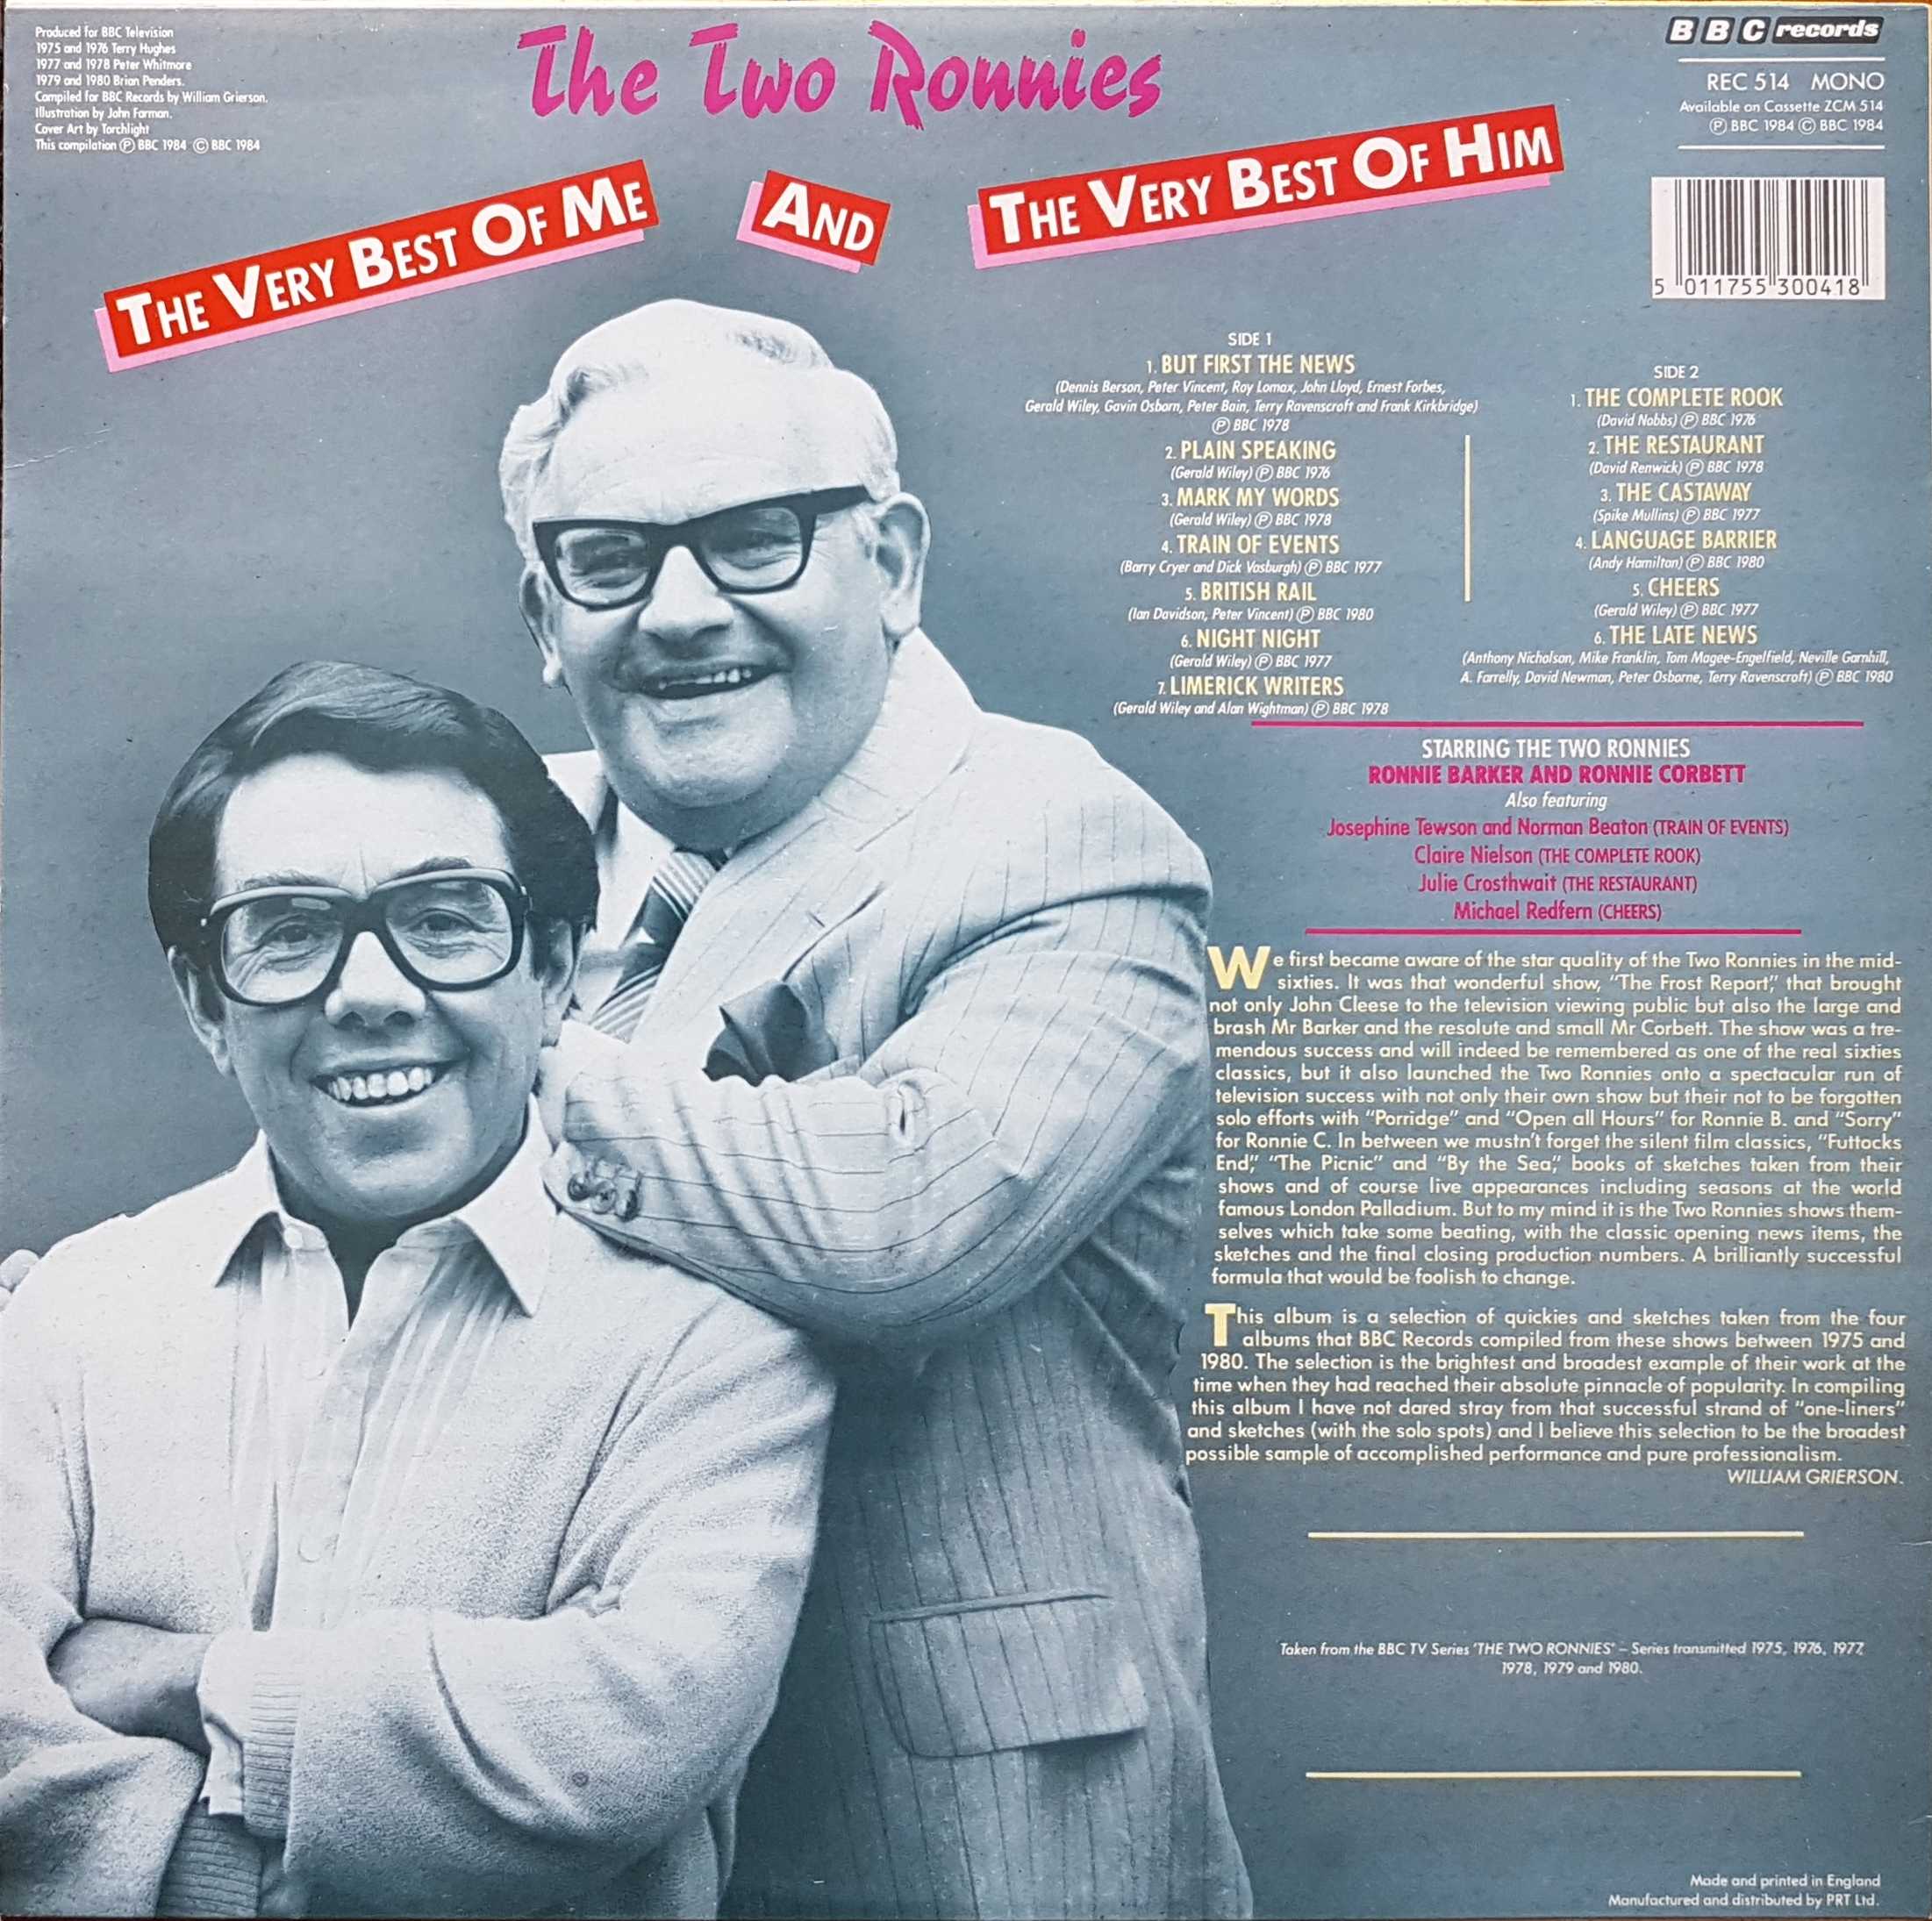 Picture of REC 514 The very best of me and the very best of him by artist Ronnie Corbett / Ronnie Barker from the BBC records and Tapes library